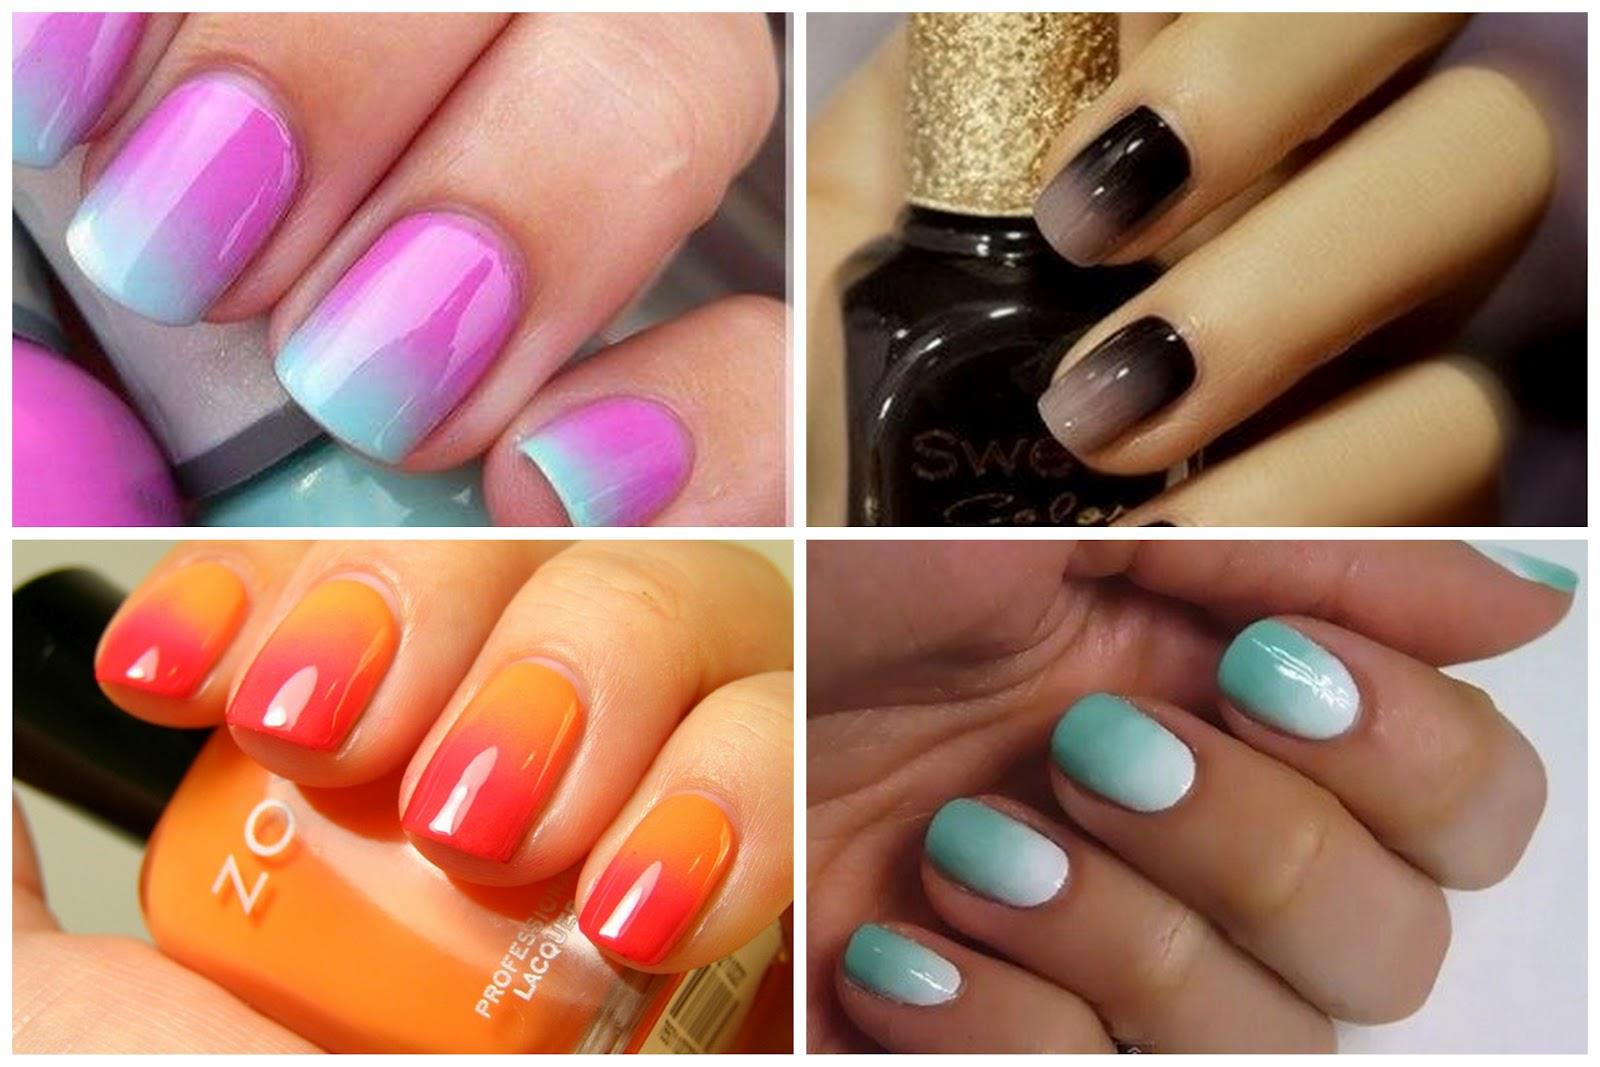 2. Best Ombre Nail Color Combinations - wide 10